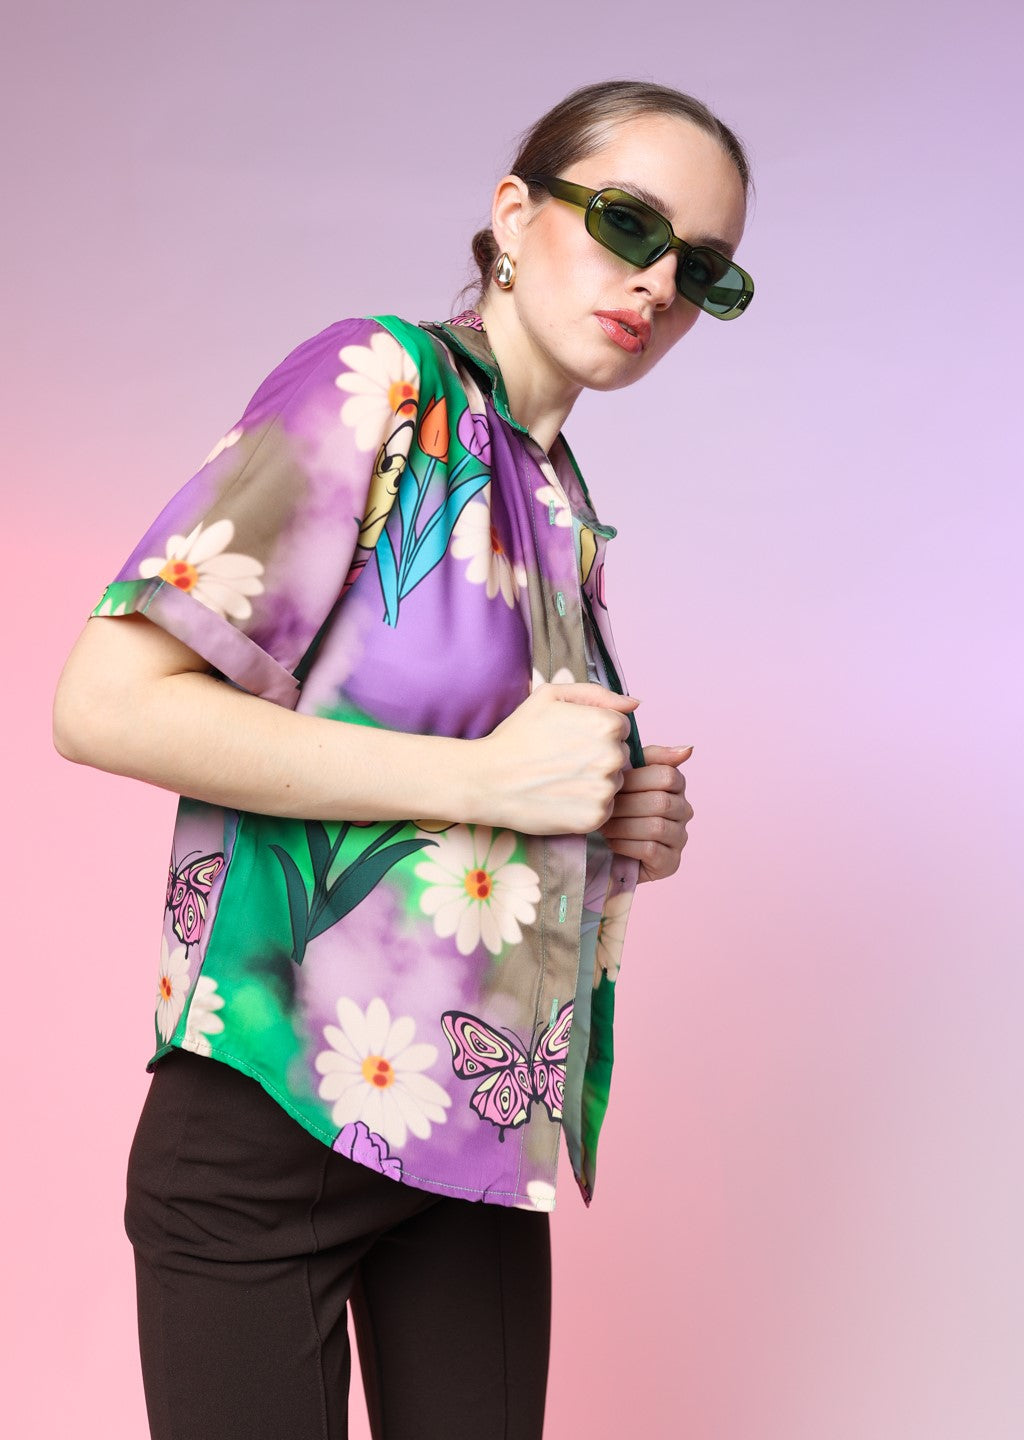 Butterfly and Breeze Printed Shirt